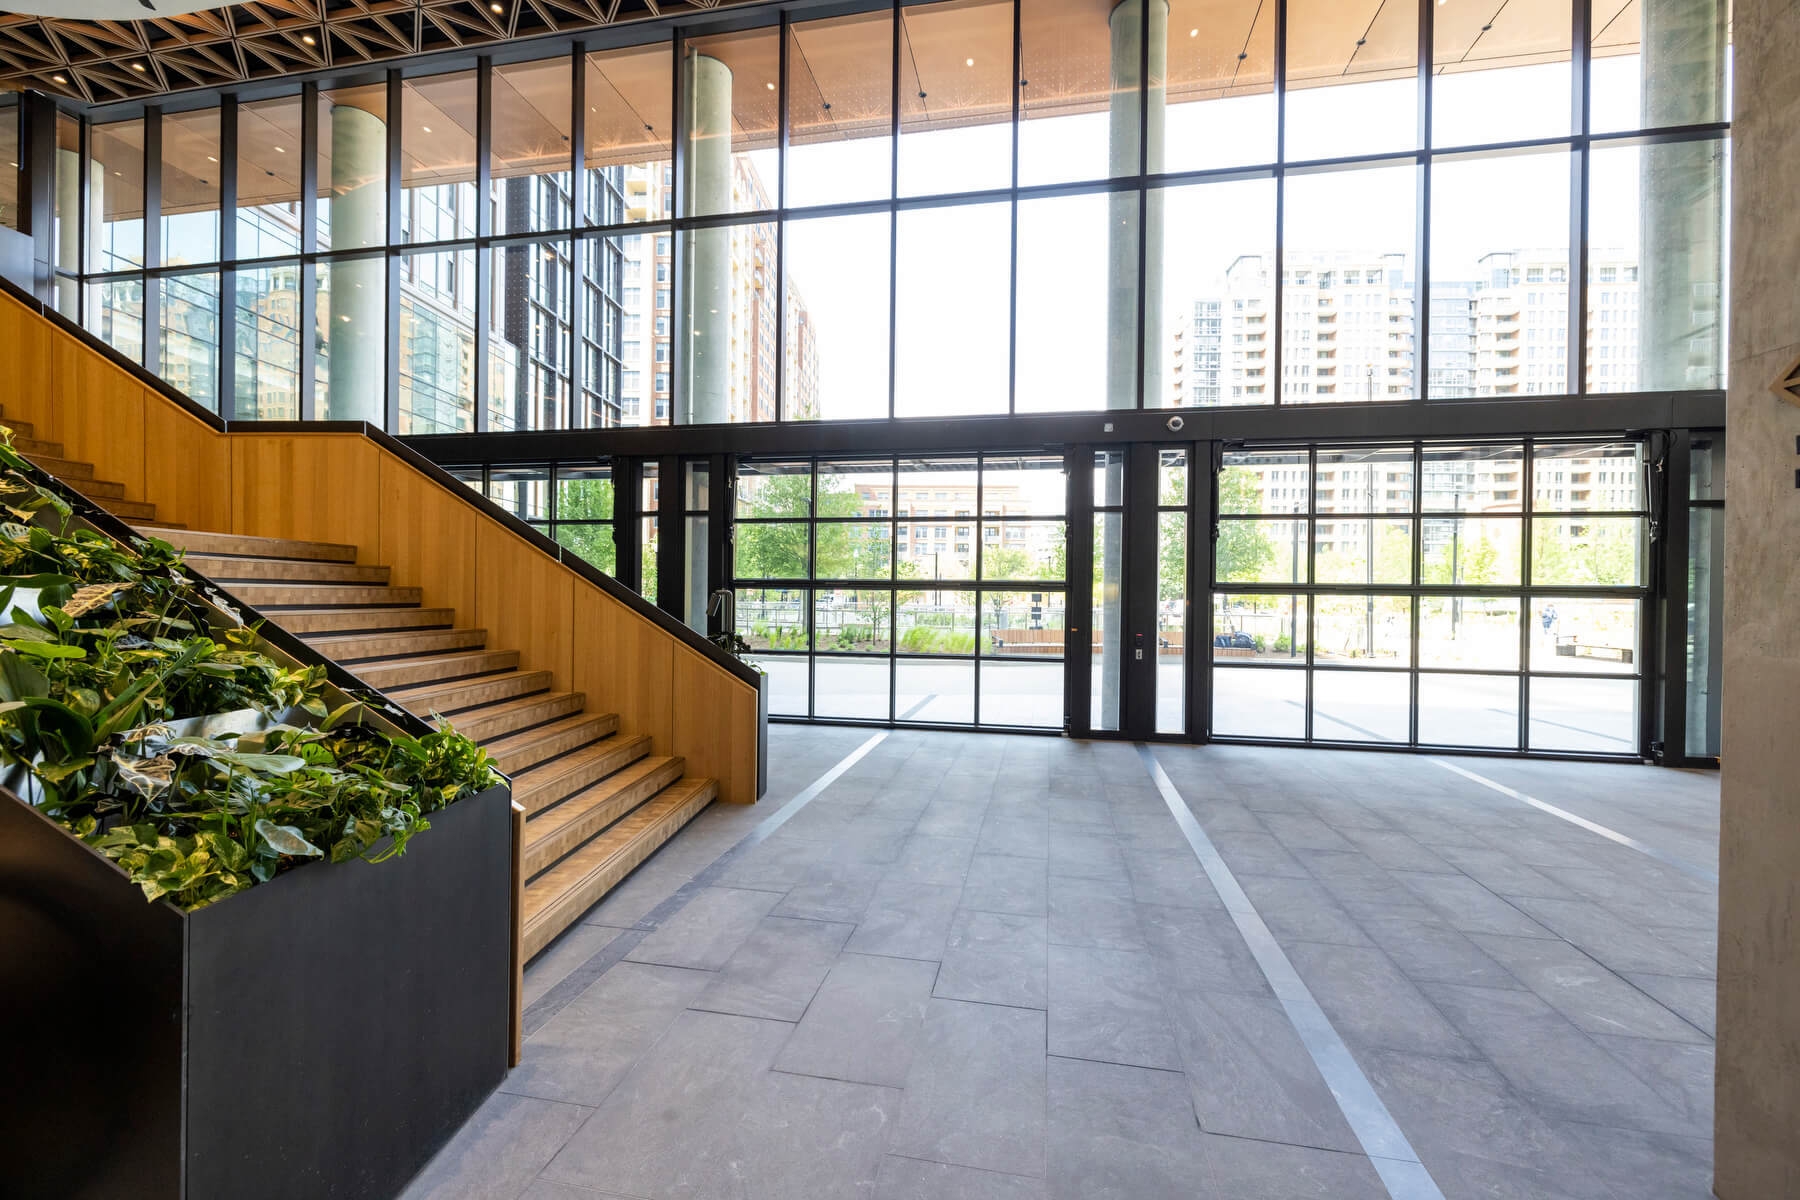 An image of a large staircase in the lobby of Amazon's second headquarters. There is a large window wall in the background 